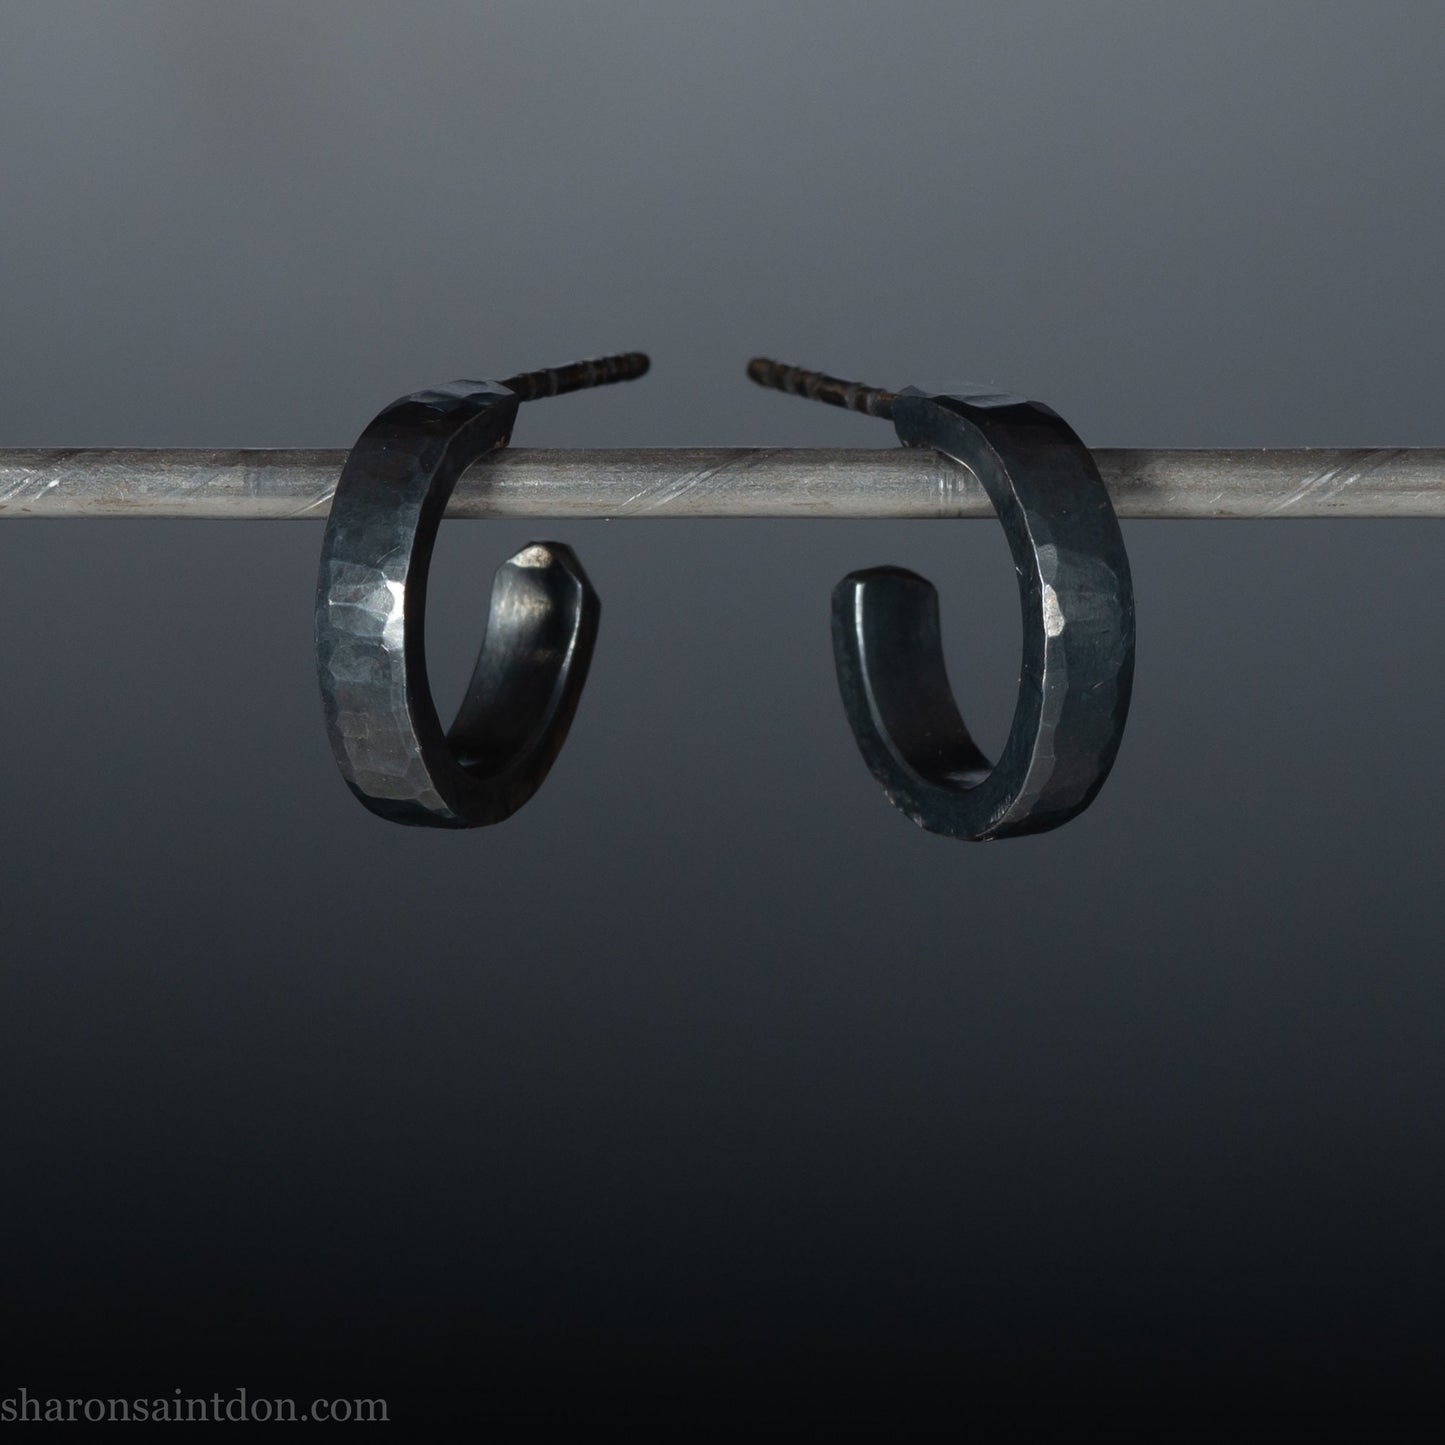 16mm x 3mm wide, handmade 925 sterling silver hoop earrings for men or women. Hammered texture, oxidized black earrings by Sharon SaintDon in North America.